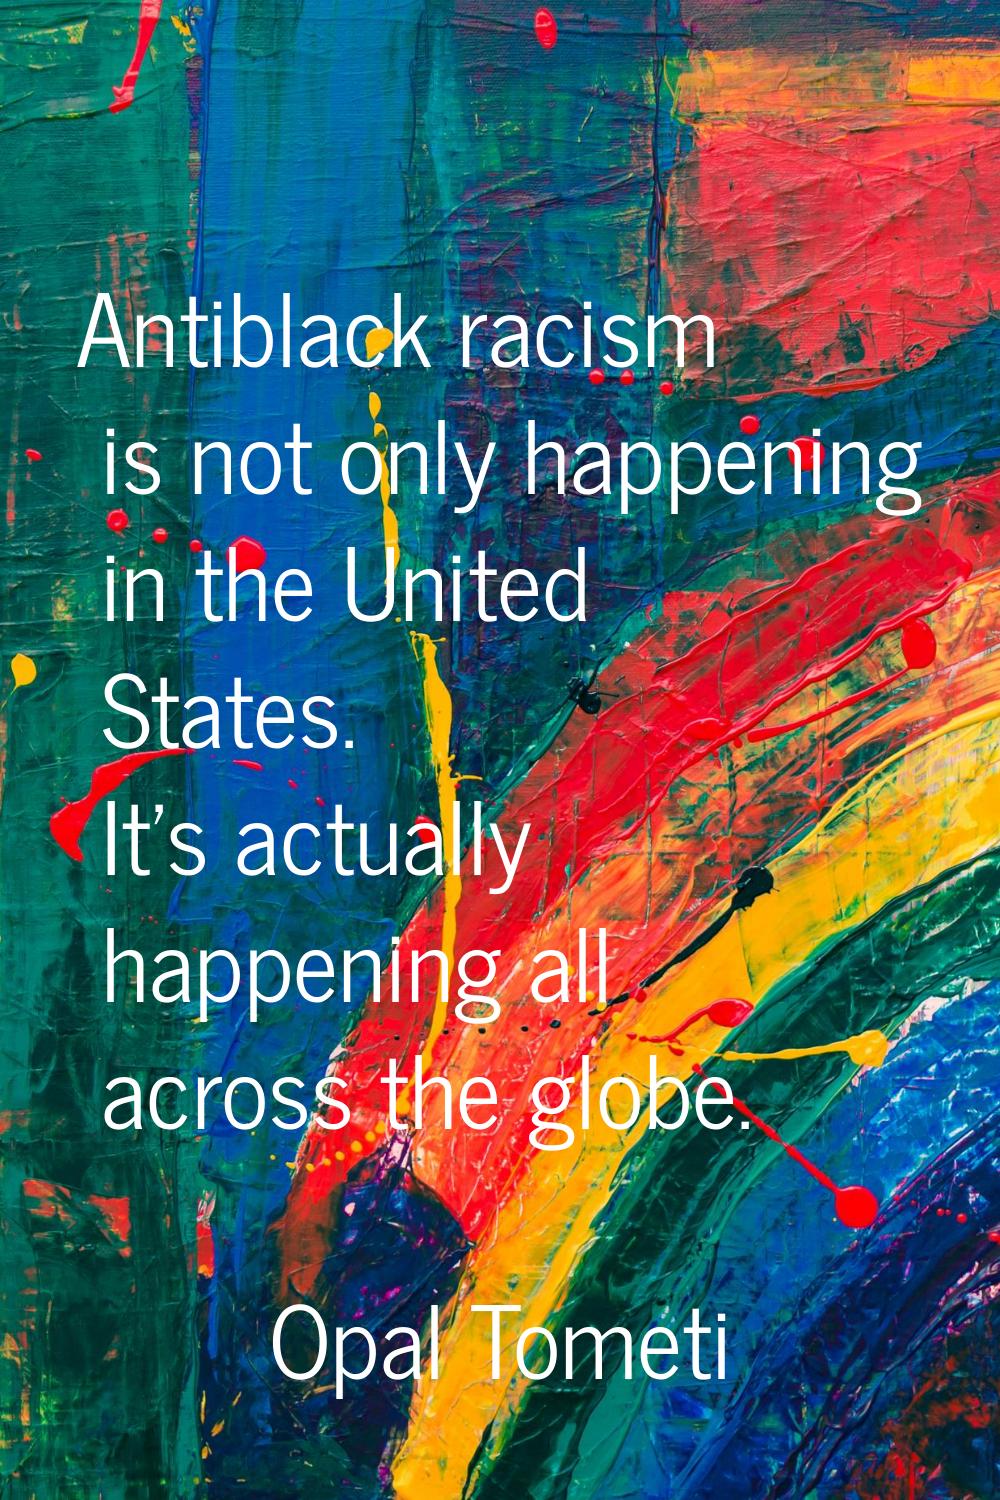 Antiblack racism is not only happening in the United States. It's actually happening all across the